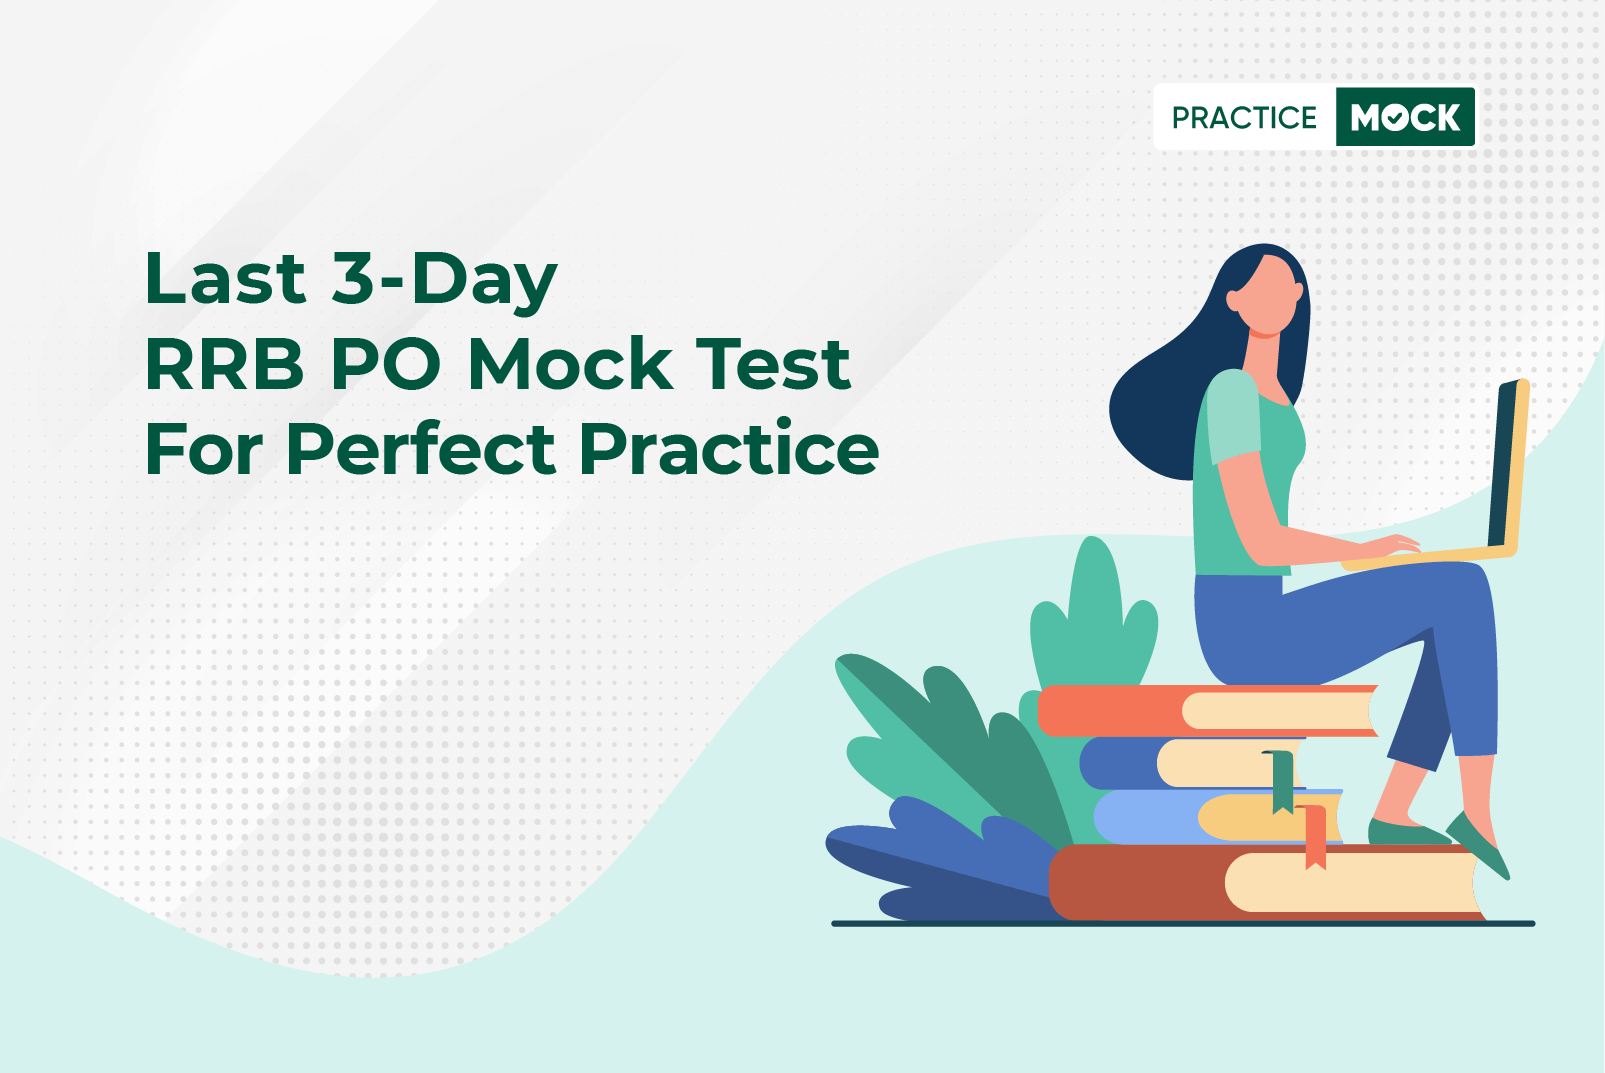 Last 3-Day RRB PO Mock Test for Perfect Practice